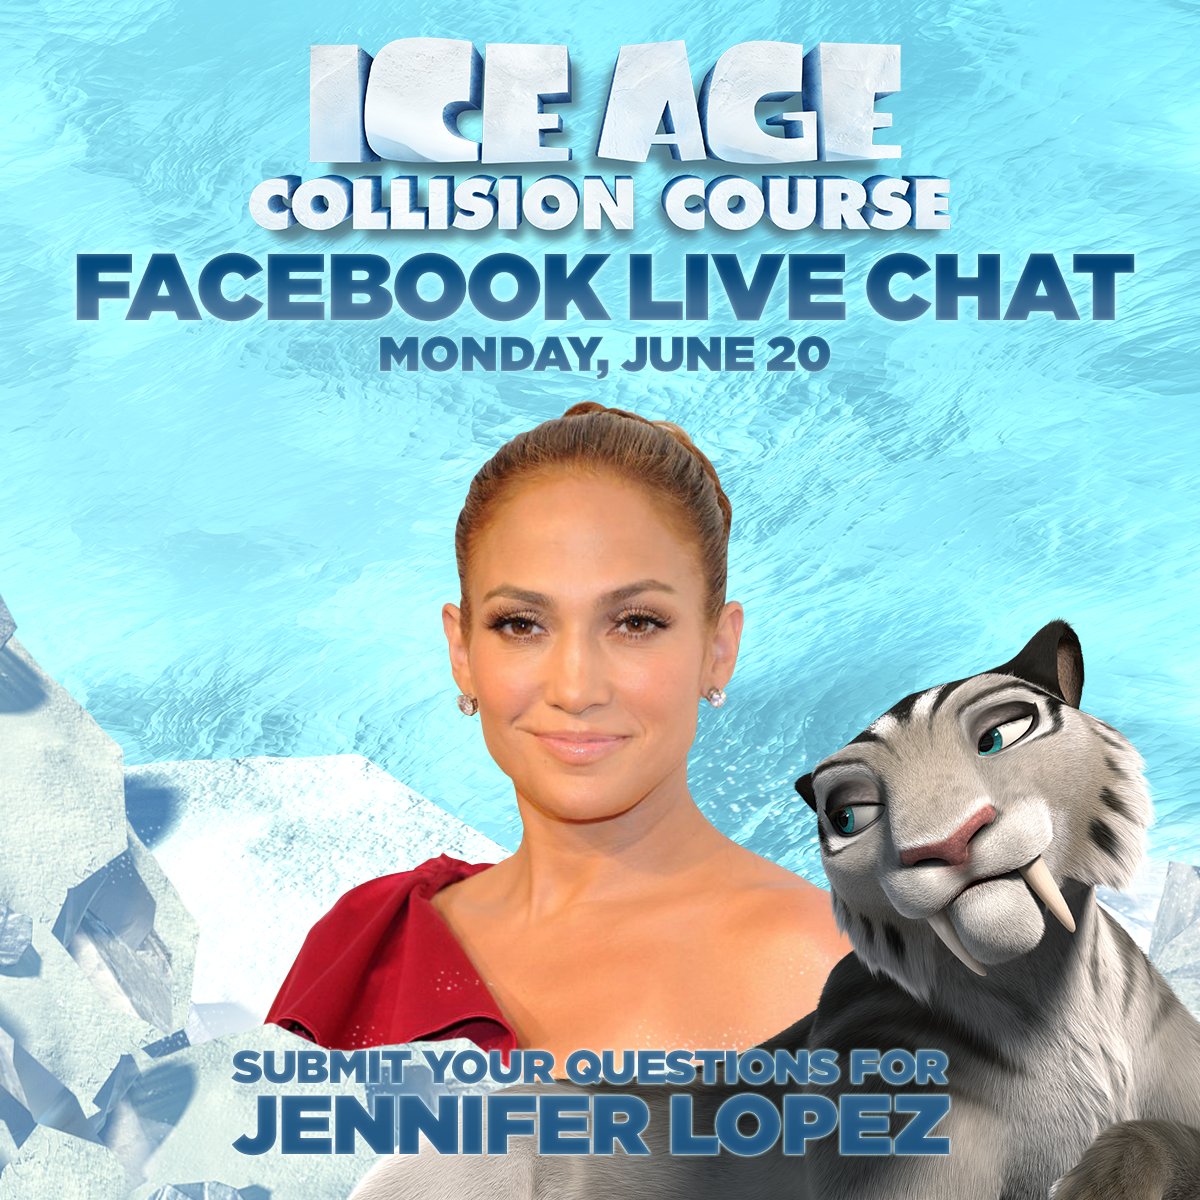 RT @IceAge: Join @JLo as she answers your questions LIVE on Monday 6/20! Leave your questions below. #IceAge #CollisionCourse https://t.co/…